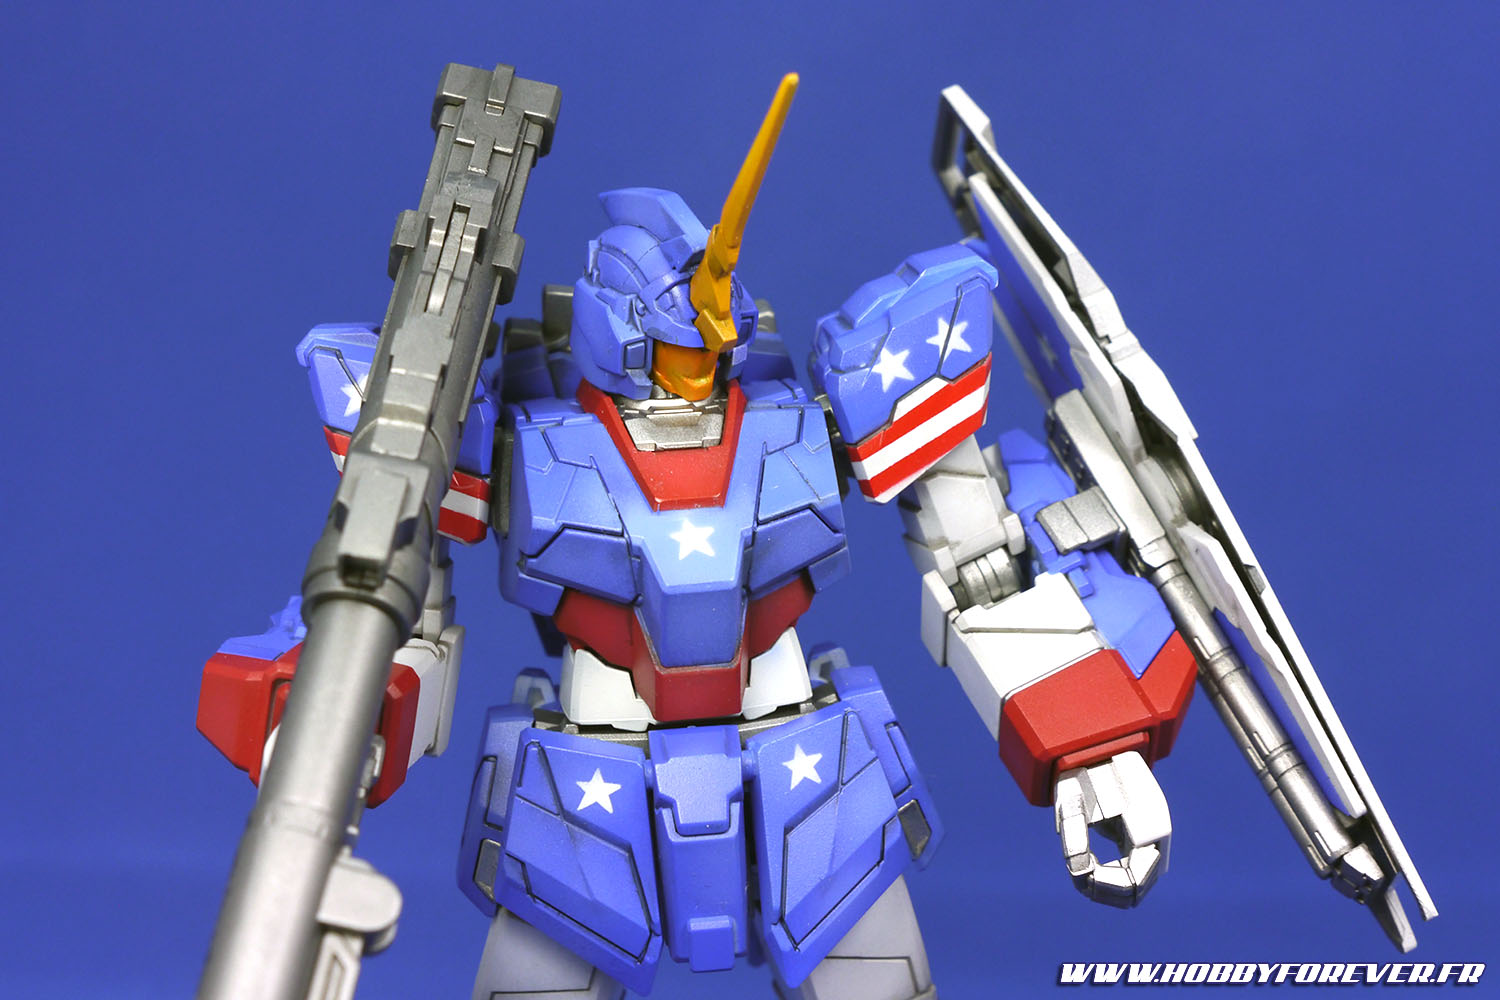 Finished work - RX-0-FDS Muricorn Gundam 'Freedom Delivery System'